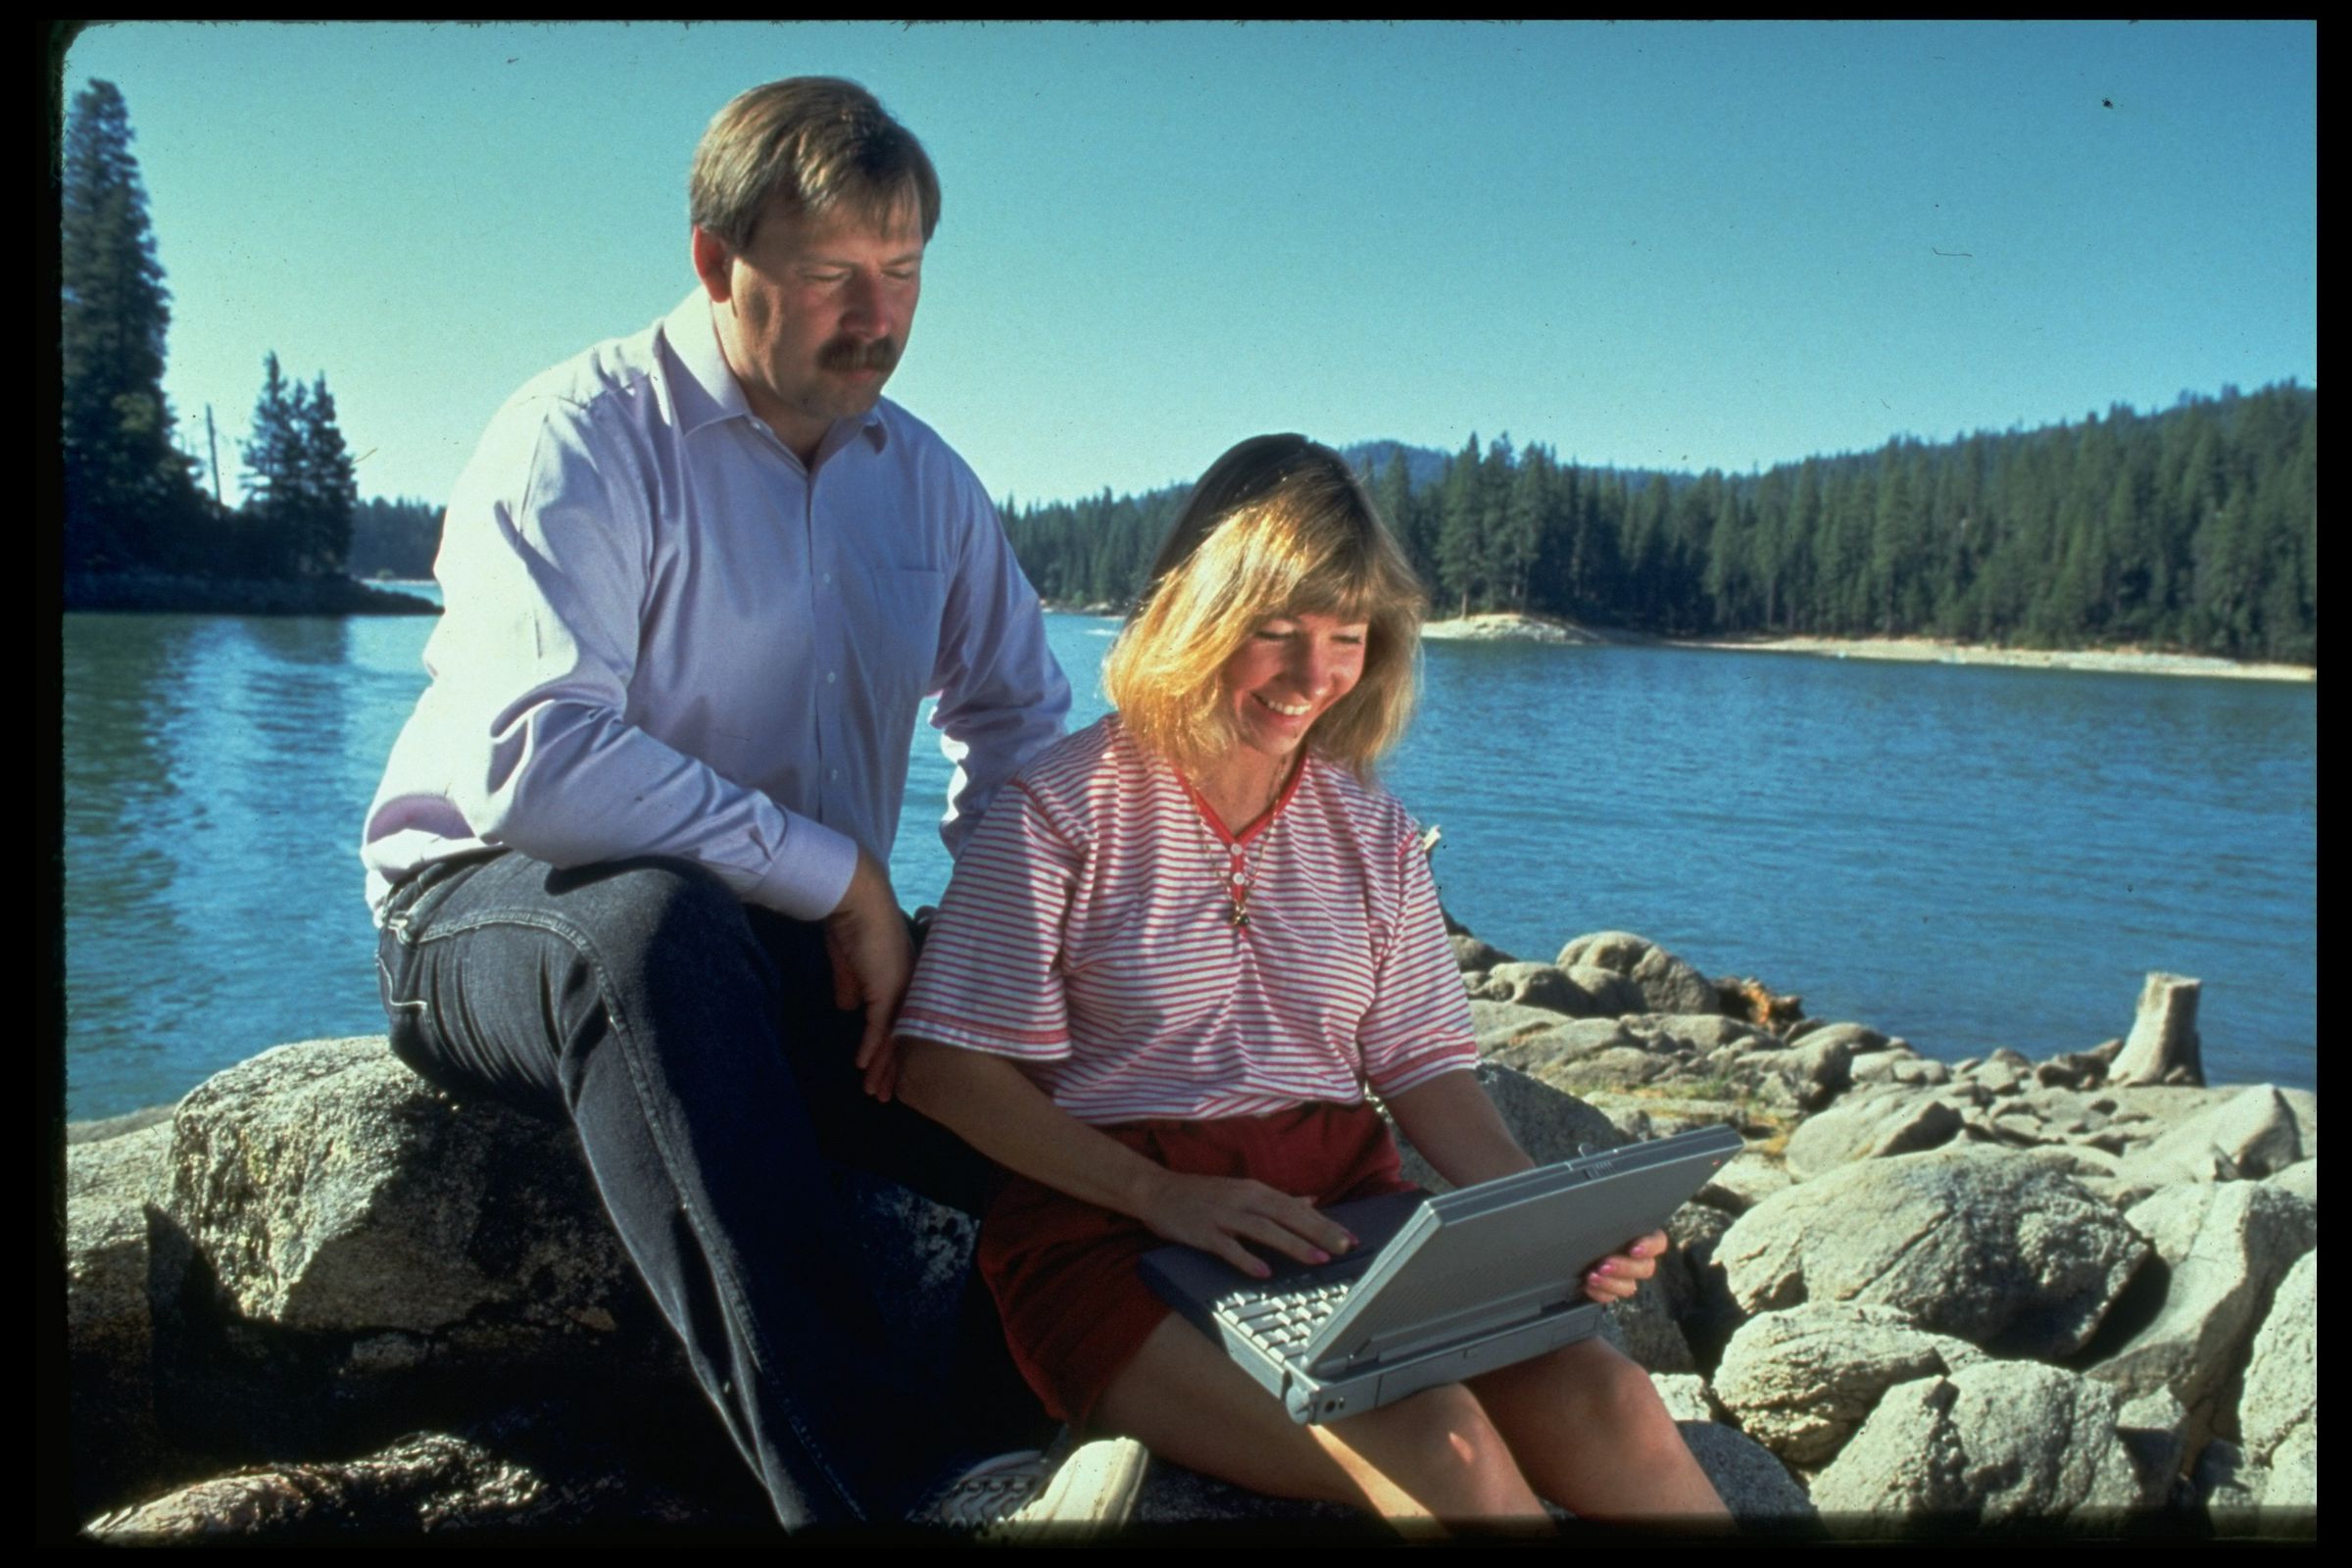 Roberta and Ken Williams, founders of Sierra and influential game designers